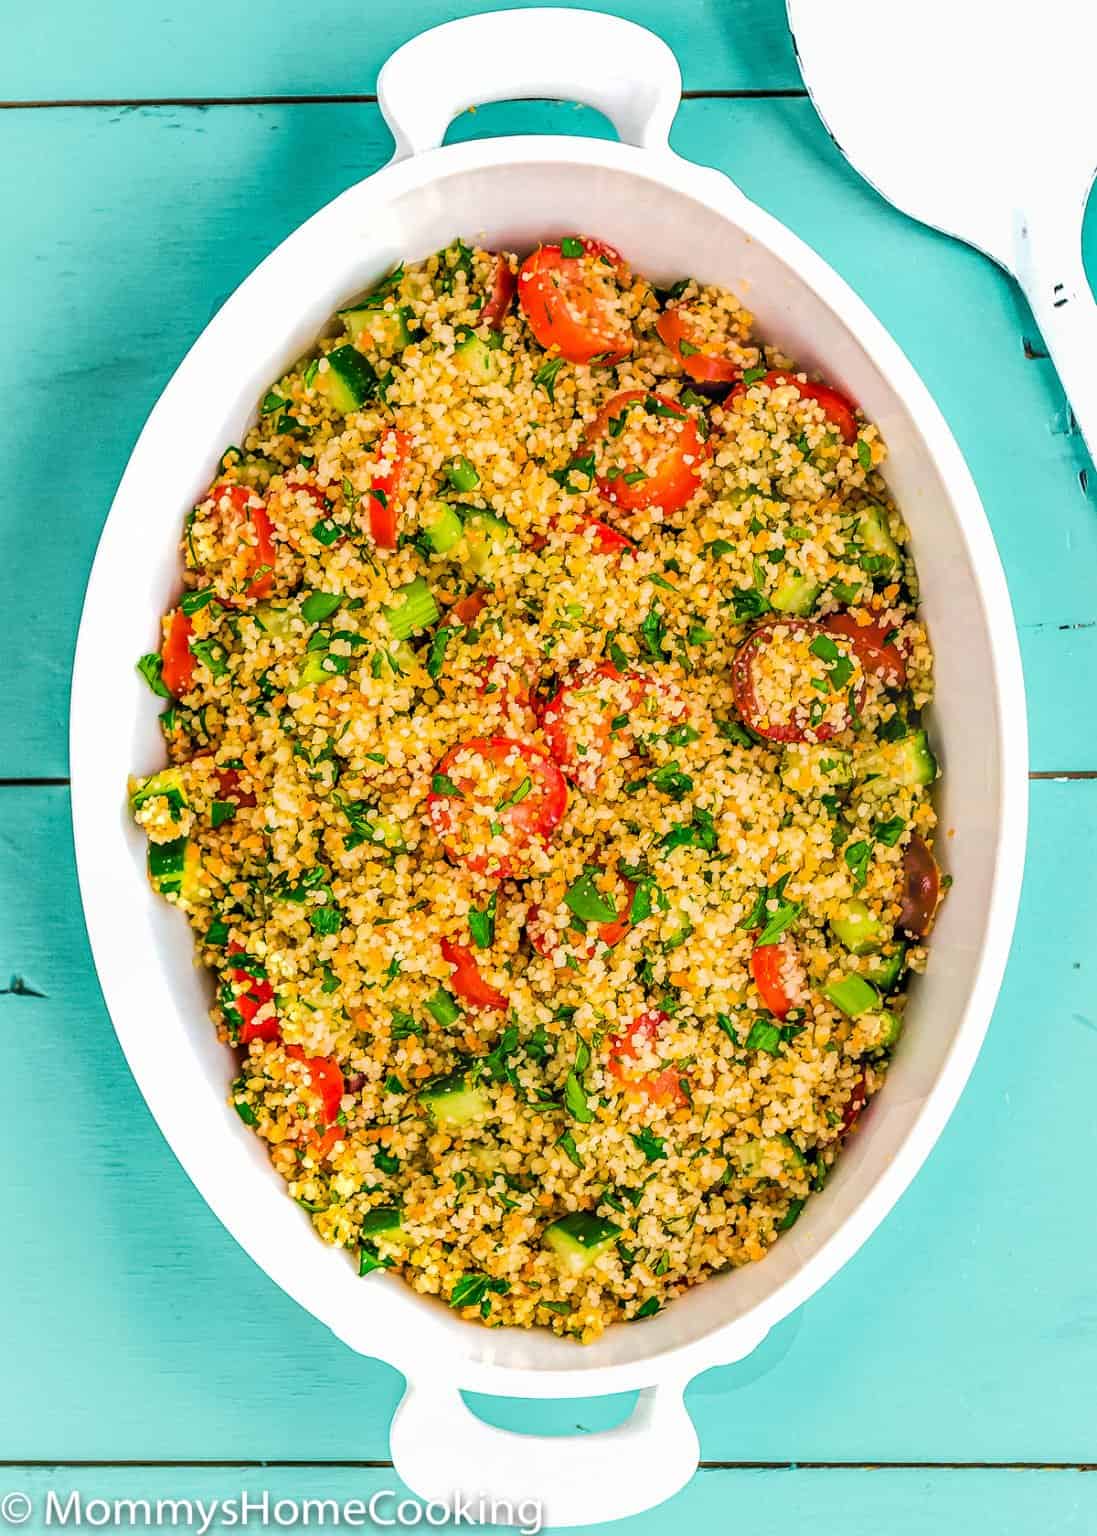 Easy & Tasty Couscous Salad - Mommy's Home Cooking